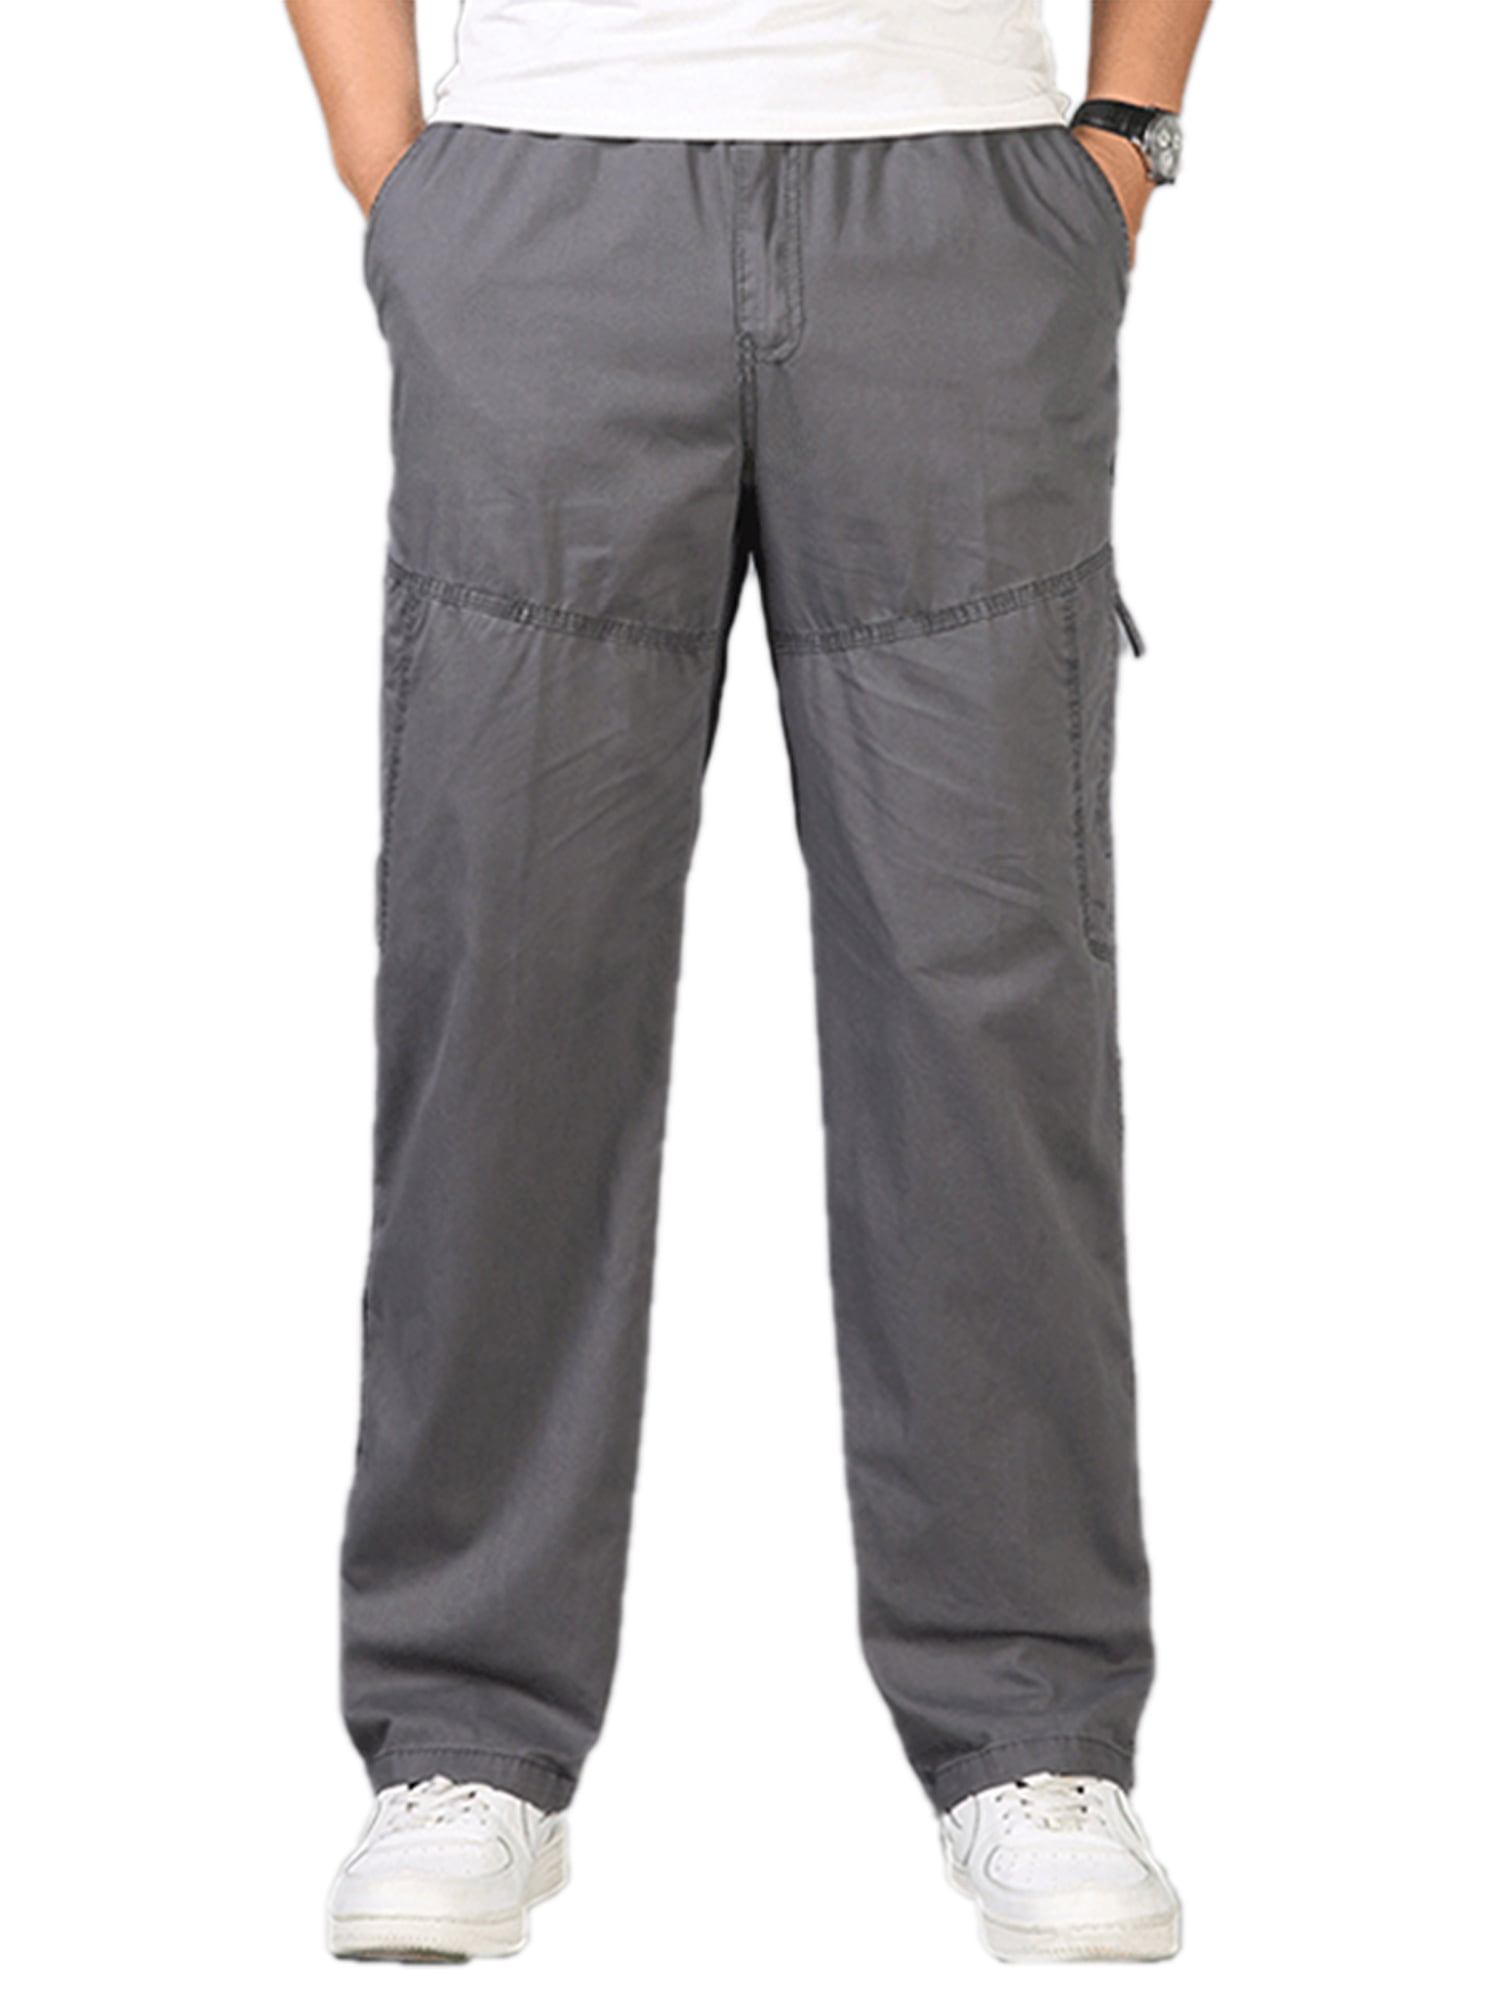 Men's Pleated Wrinkle Resistant Cargo Pant Elastic Waist Pants Relaxed ...